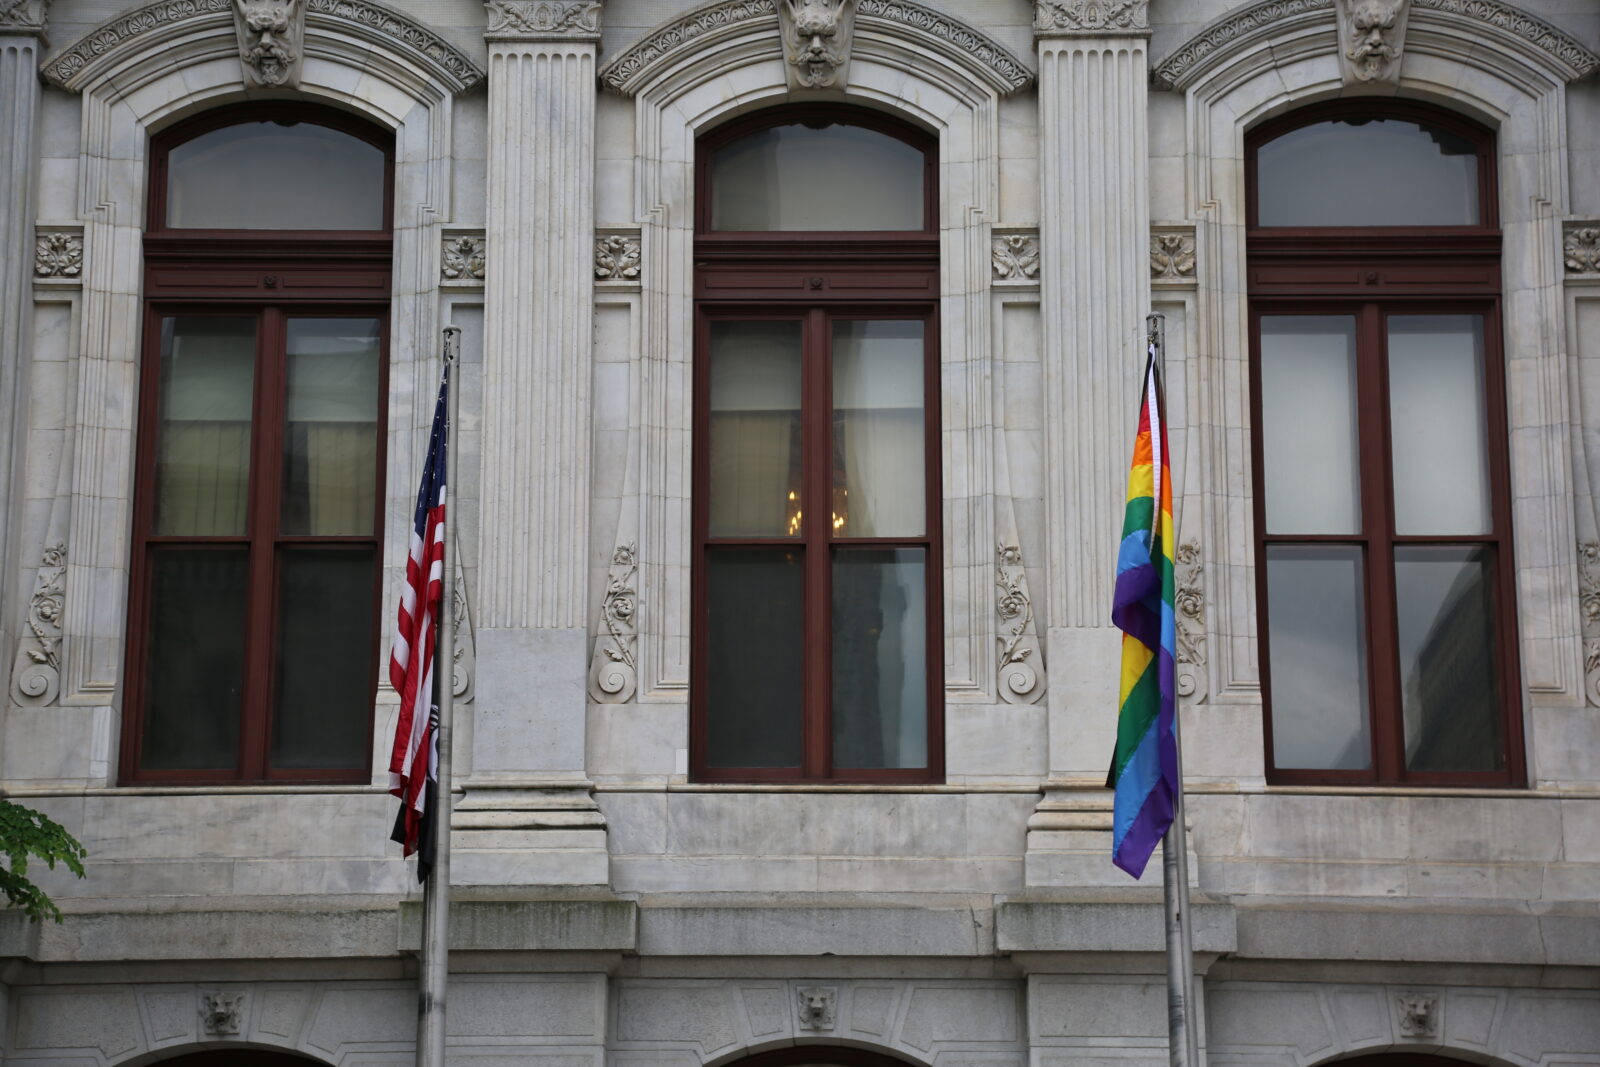 U.S. flag and the new LGBTQ flag, side by side in front of Philadelphia CIty Hall